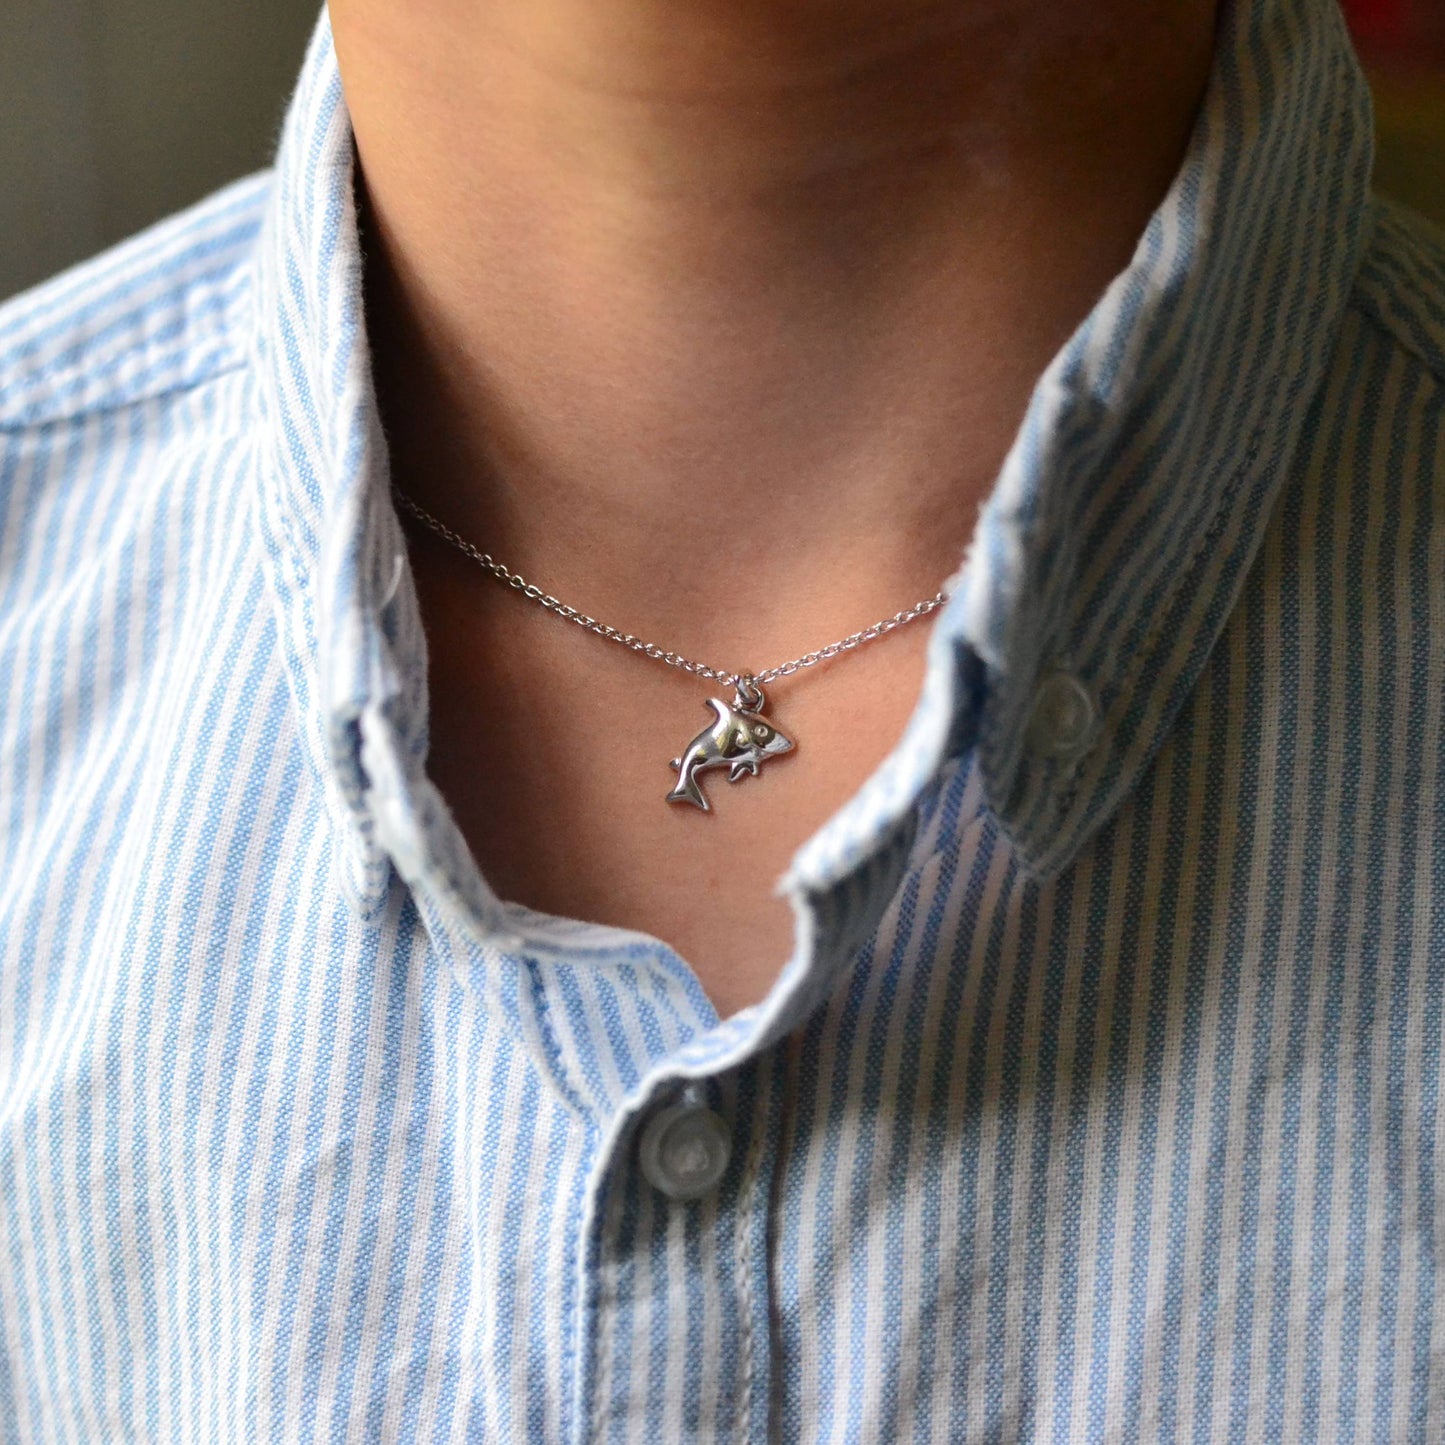 Boy wearing Children's Silver Shark with Smile Pendant on an Extendable Chain Necklace